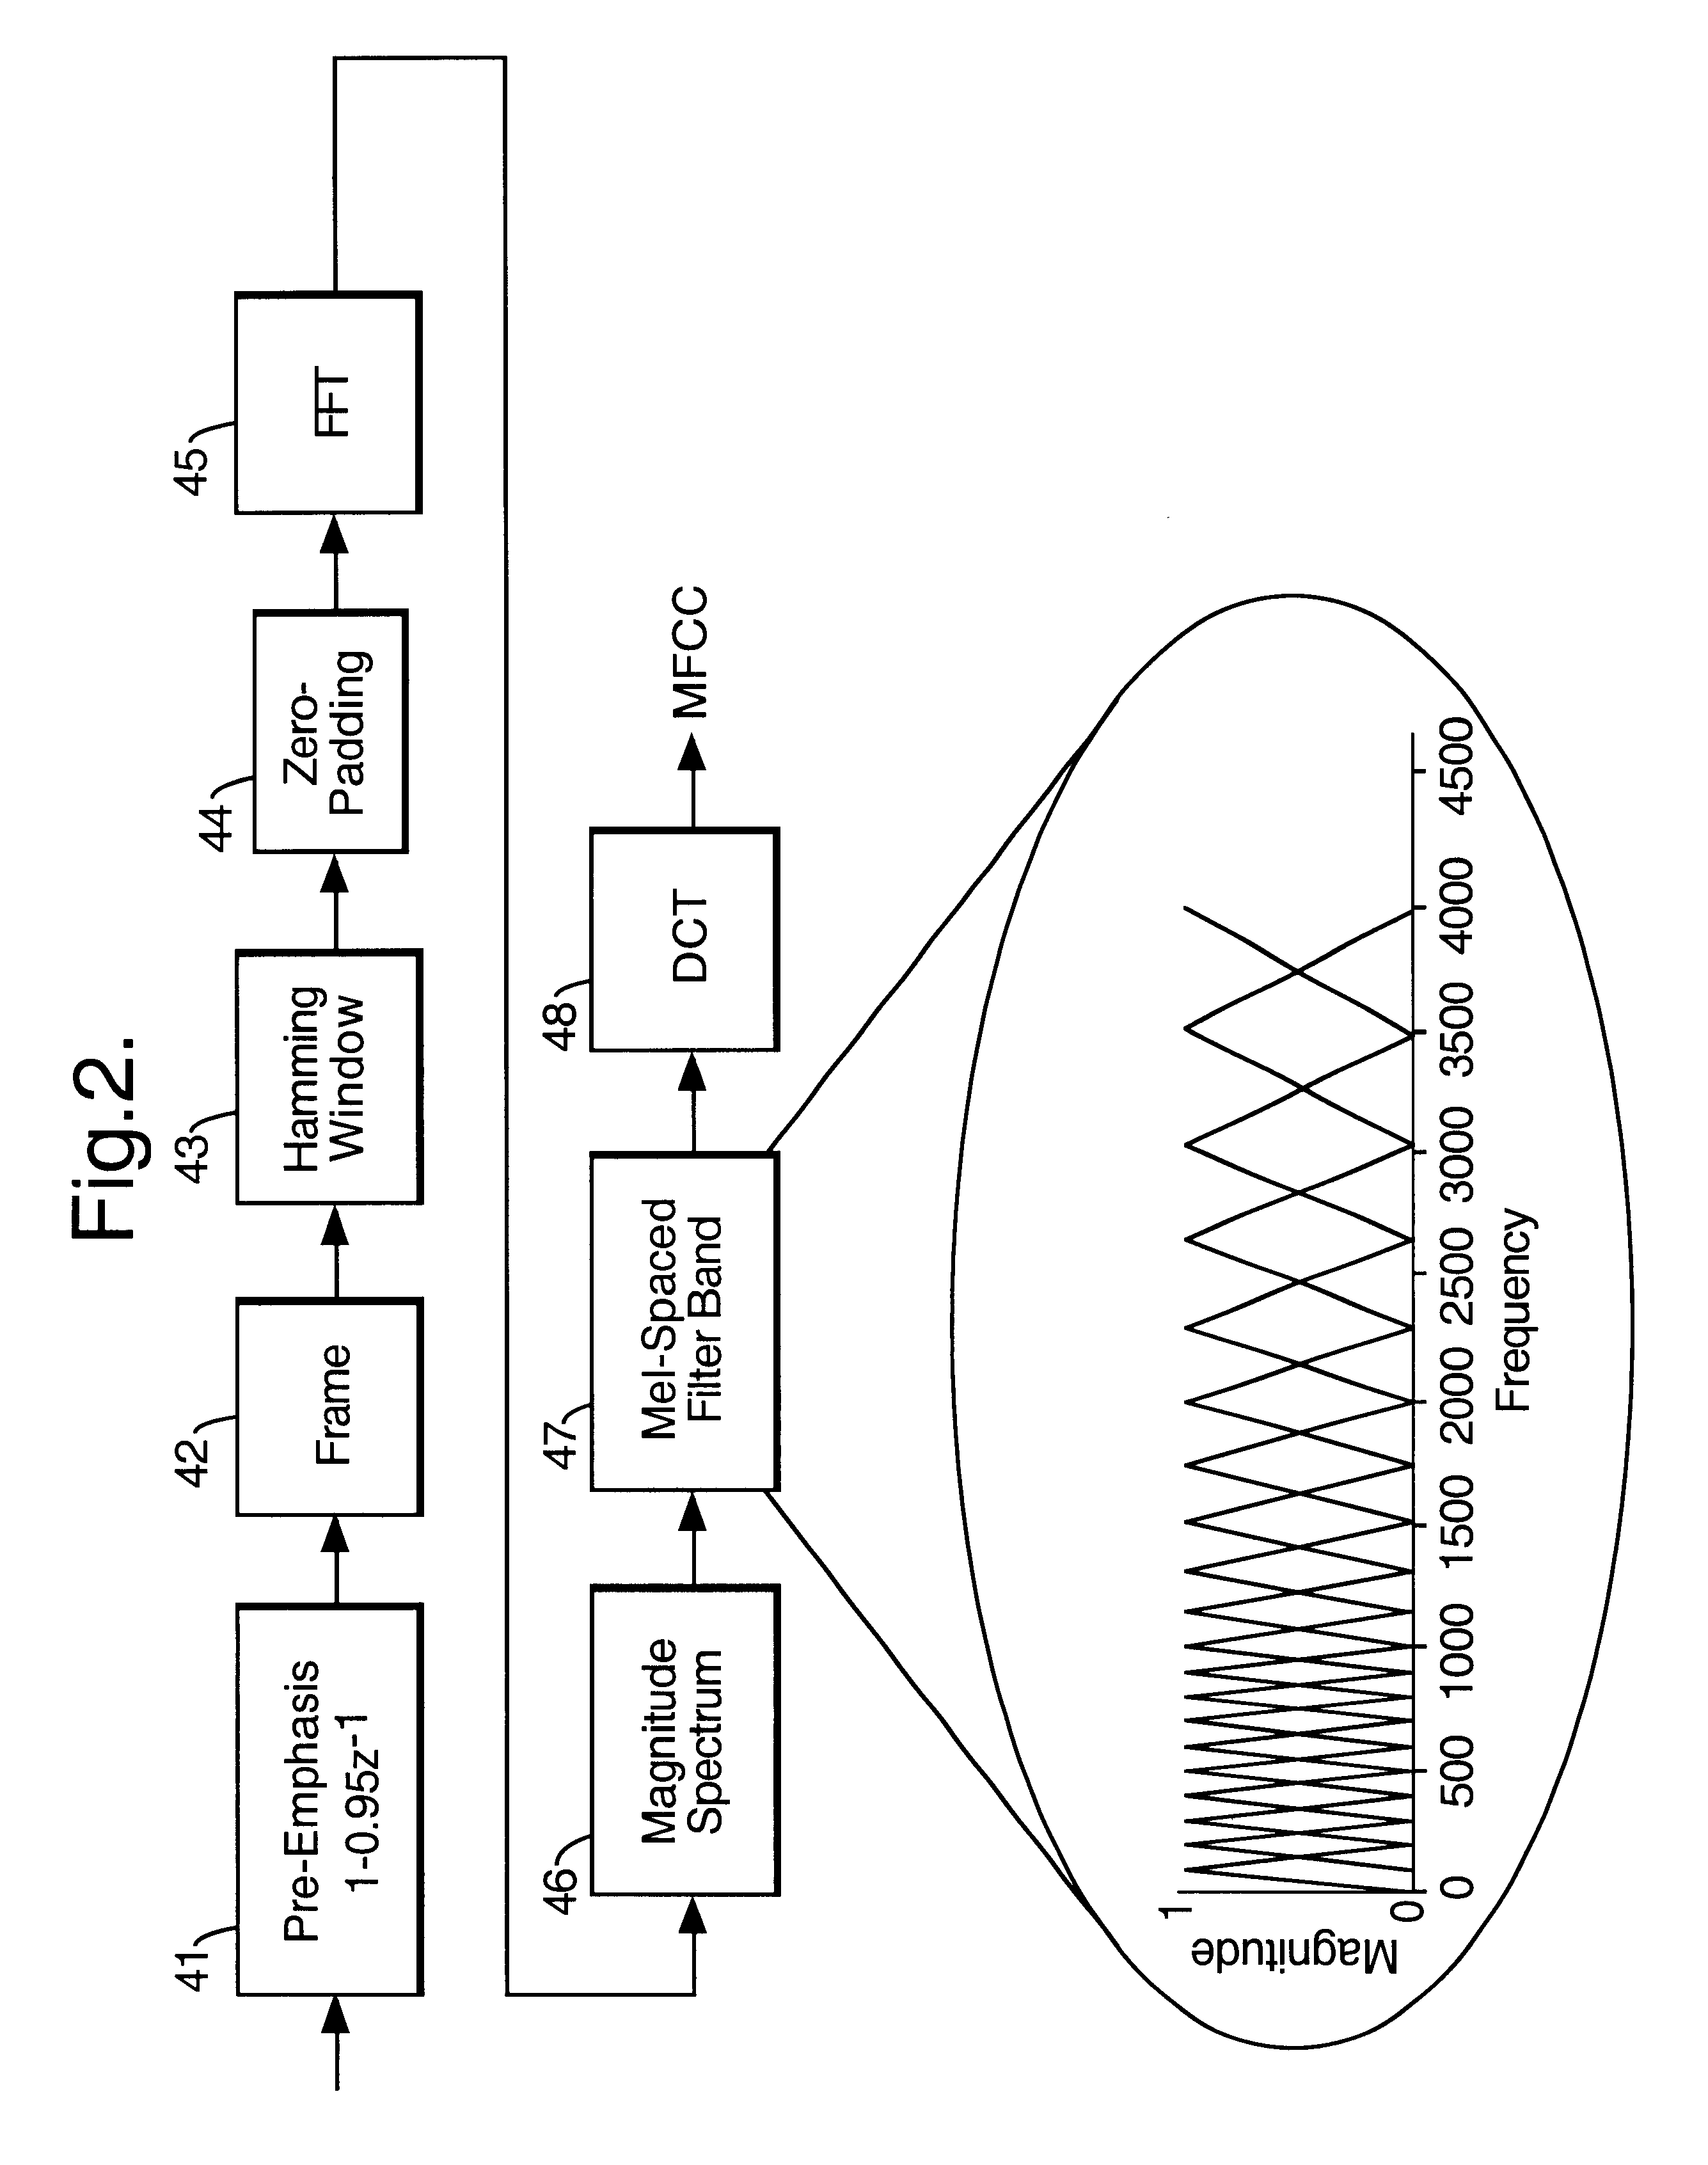 Method and apparatus for speaker recognition via comparing an unknown input to reference data